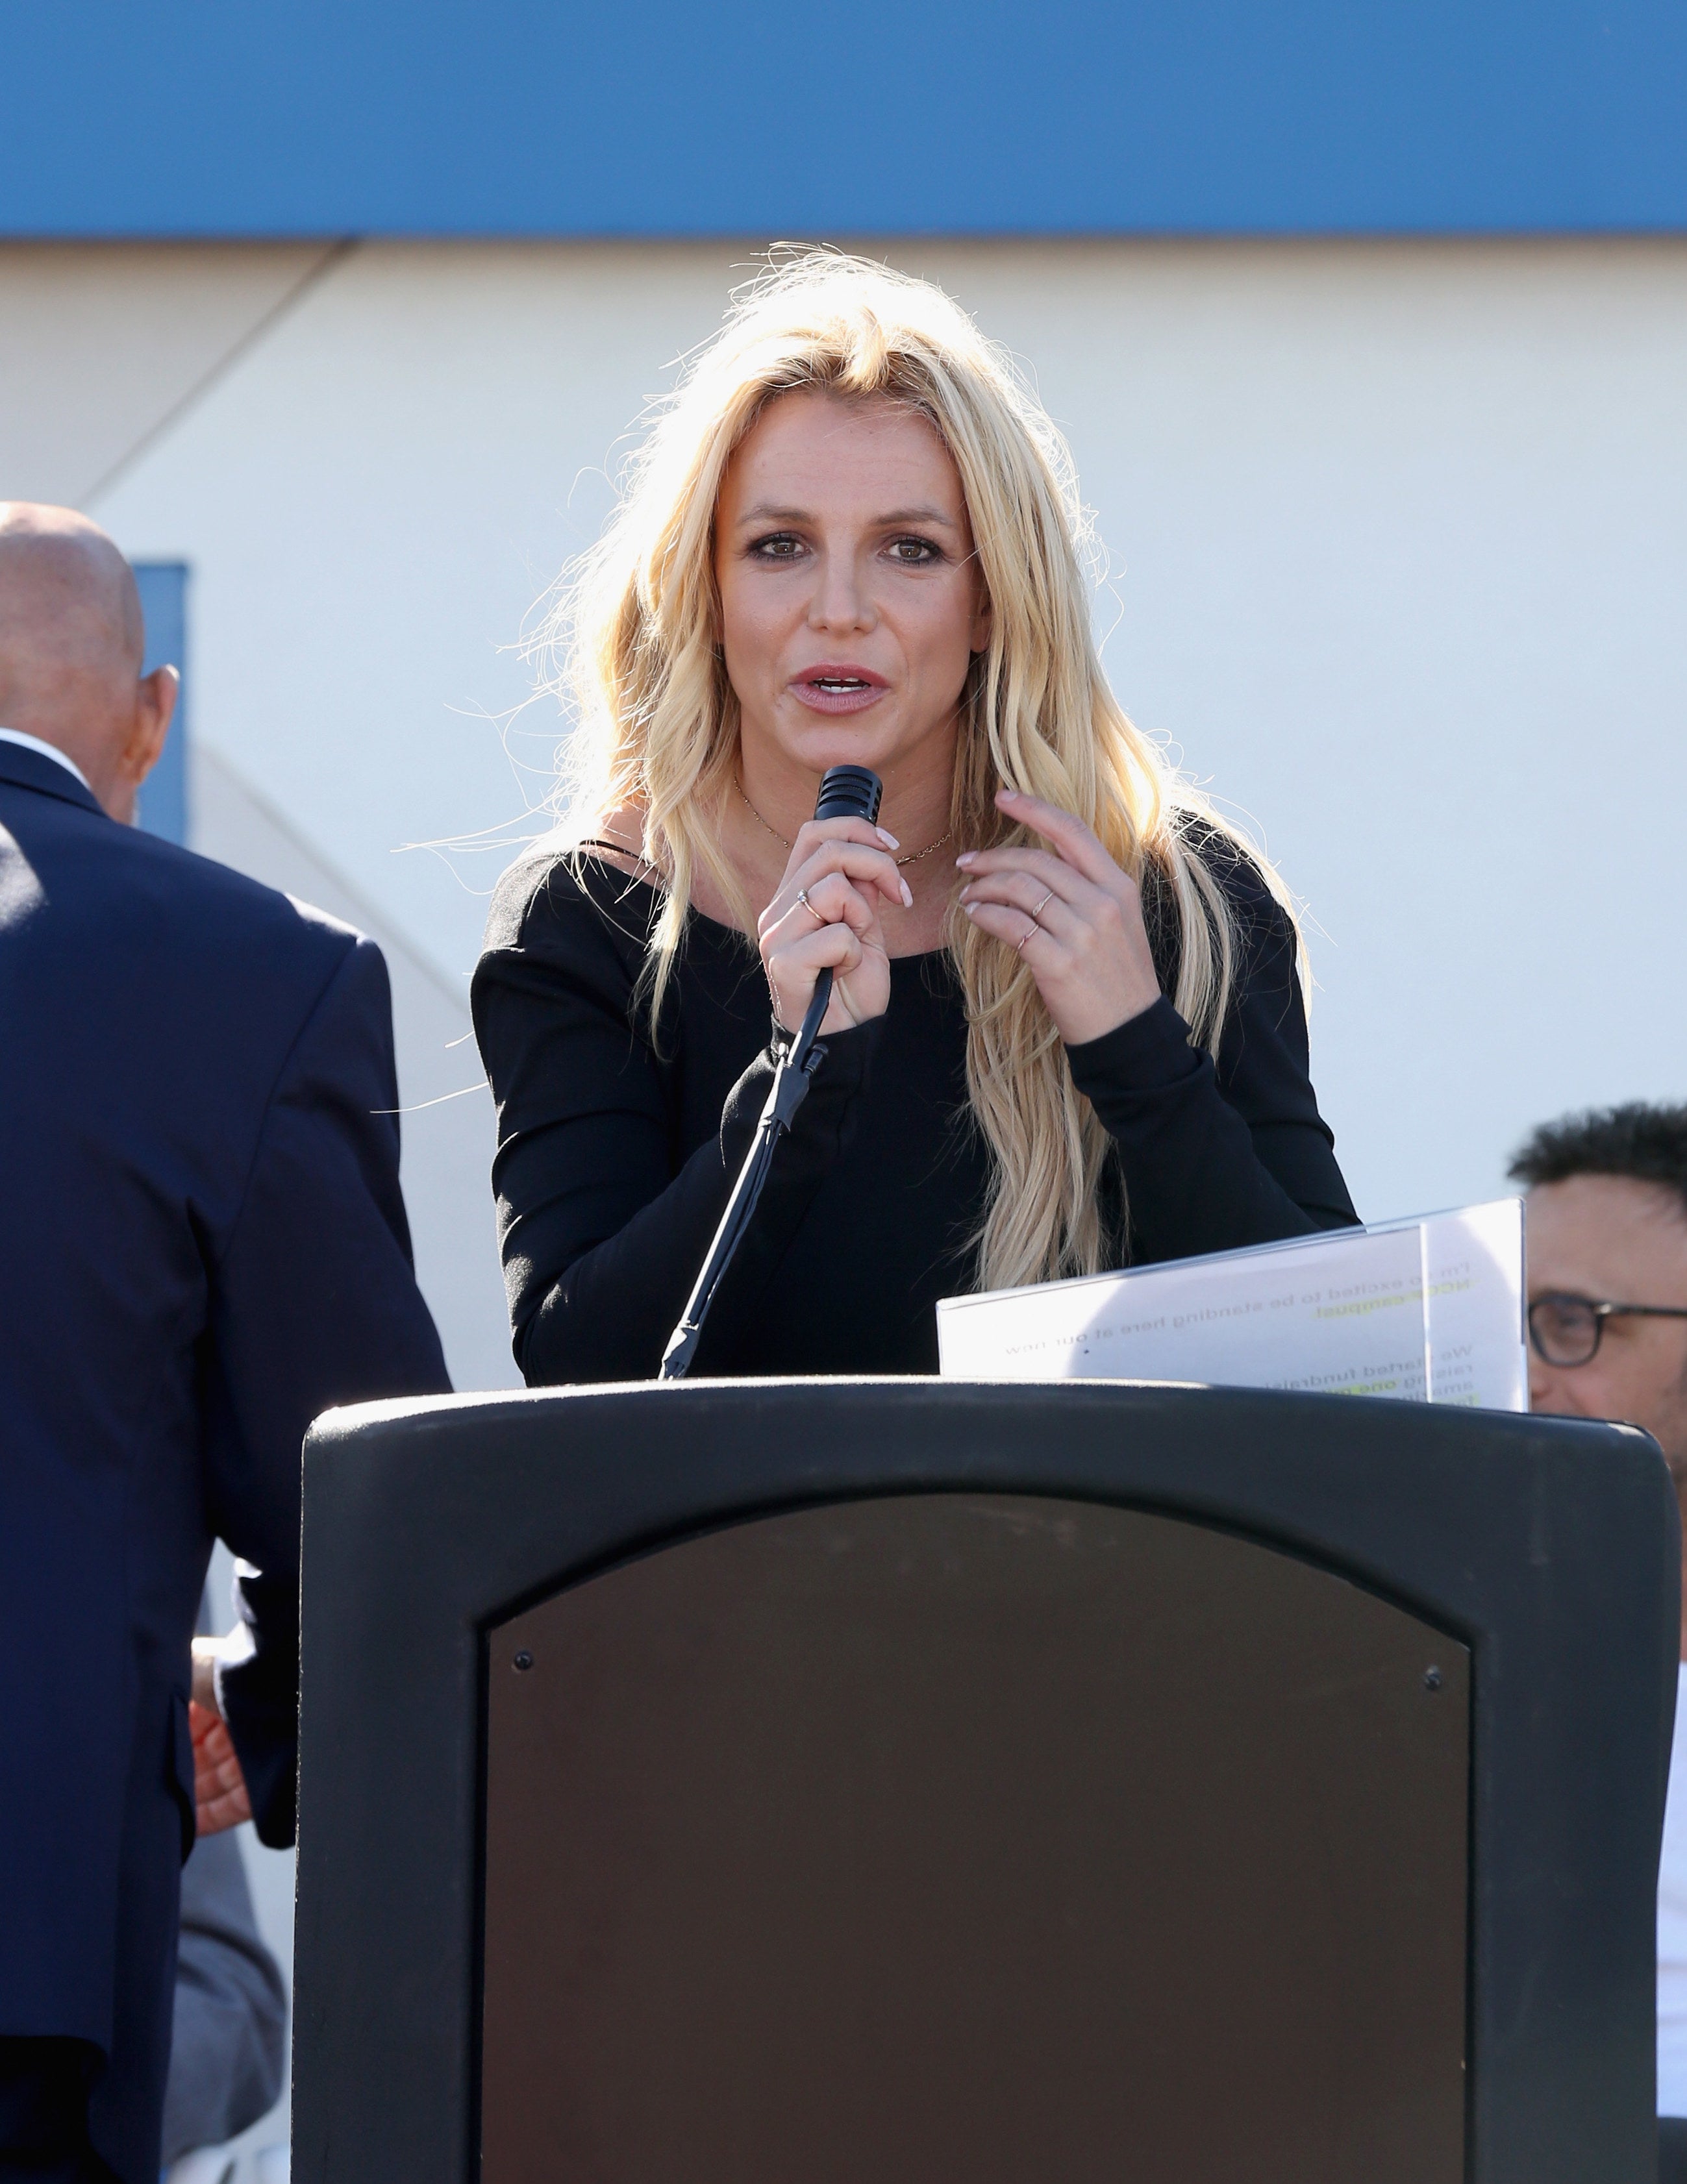 Close-up of Britney at a podium